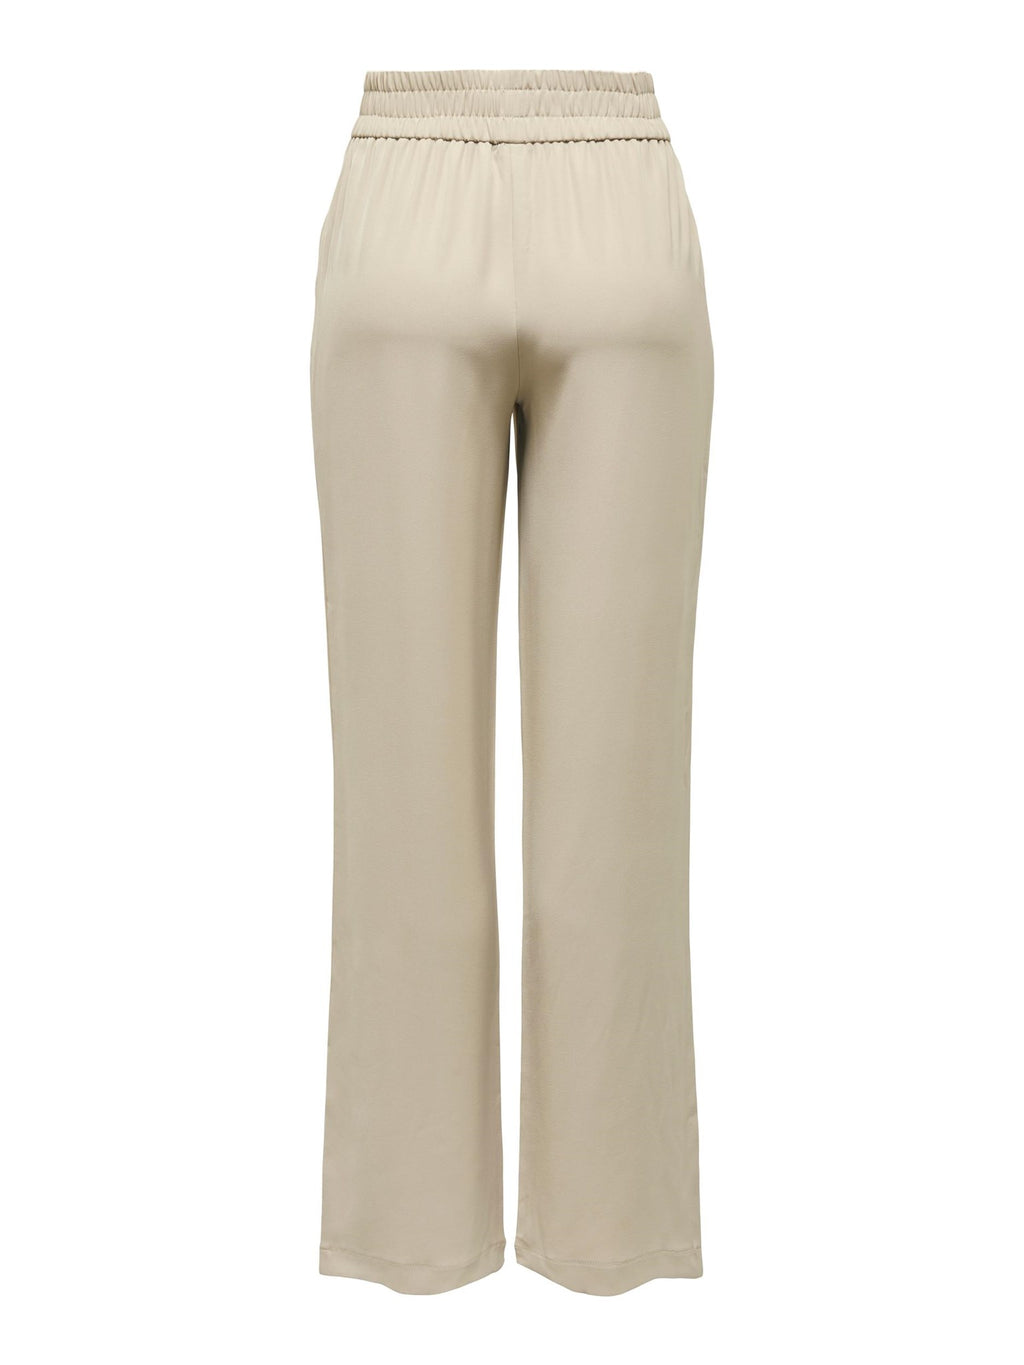 Lucy-Laura Wide Pants - Oxford Tan